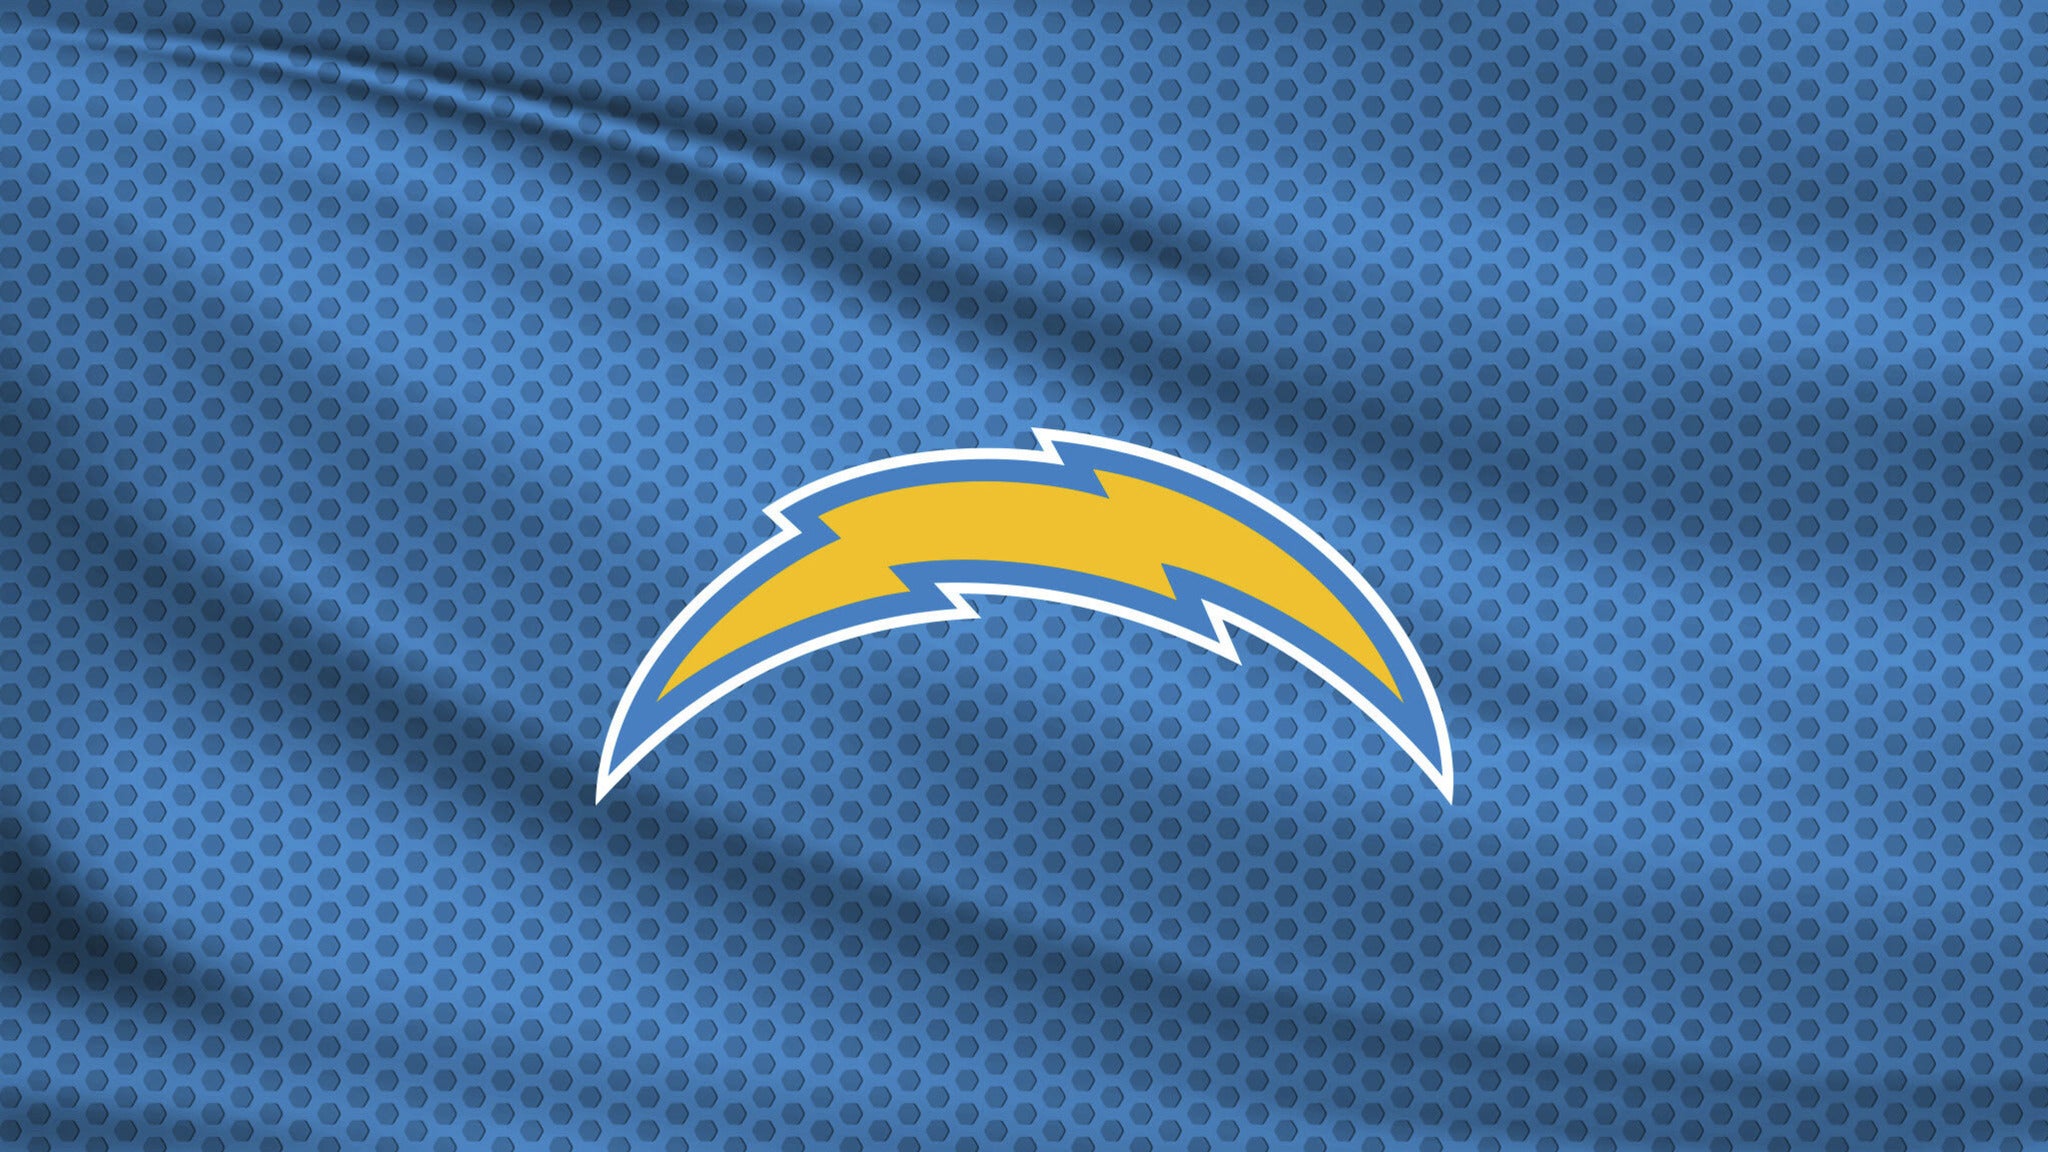 los angeles chargers game tickets